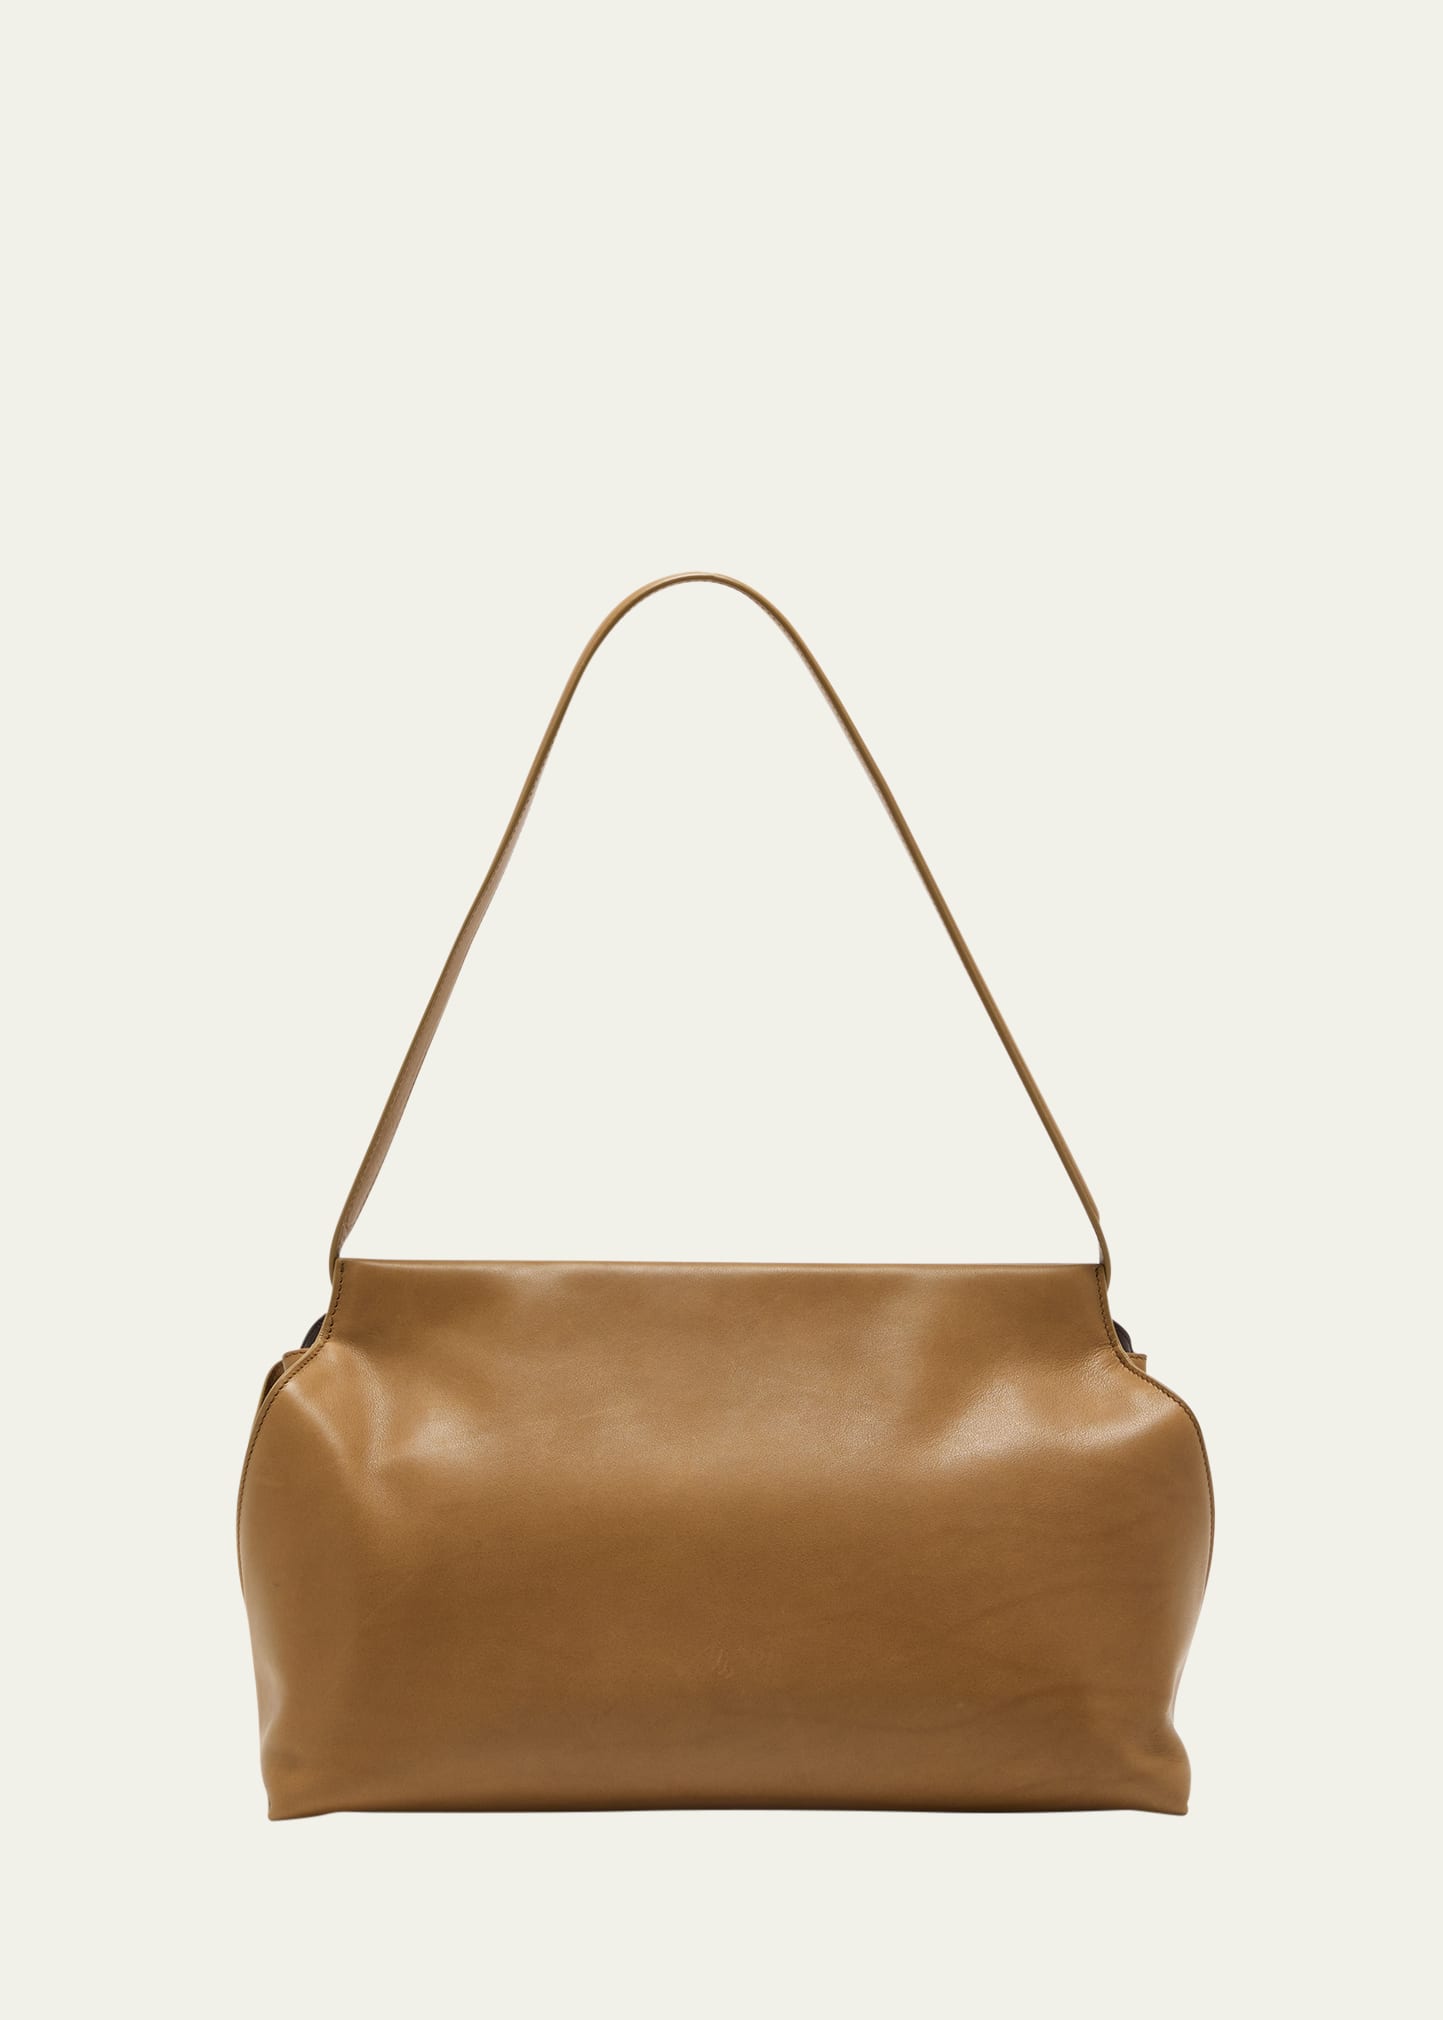 THE ROW SIENNA SHOULDER BAG IN SADDLE LEATHER